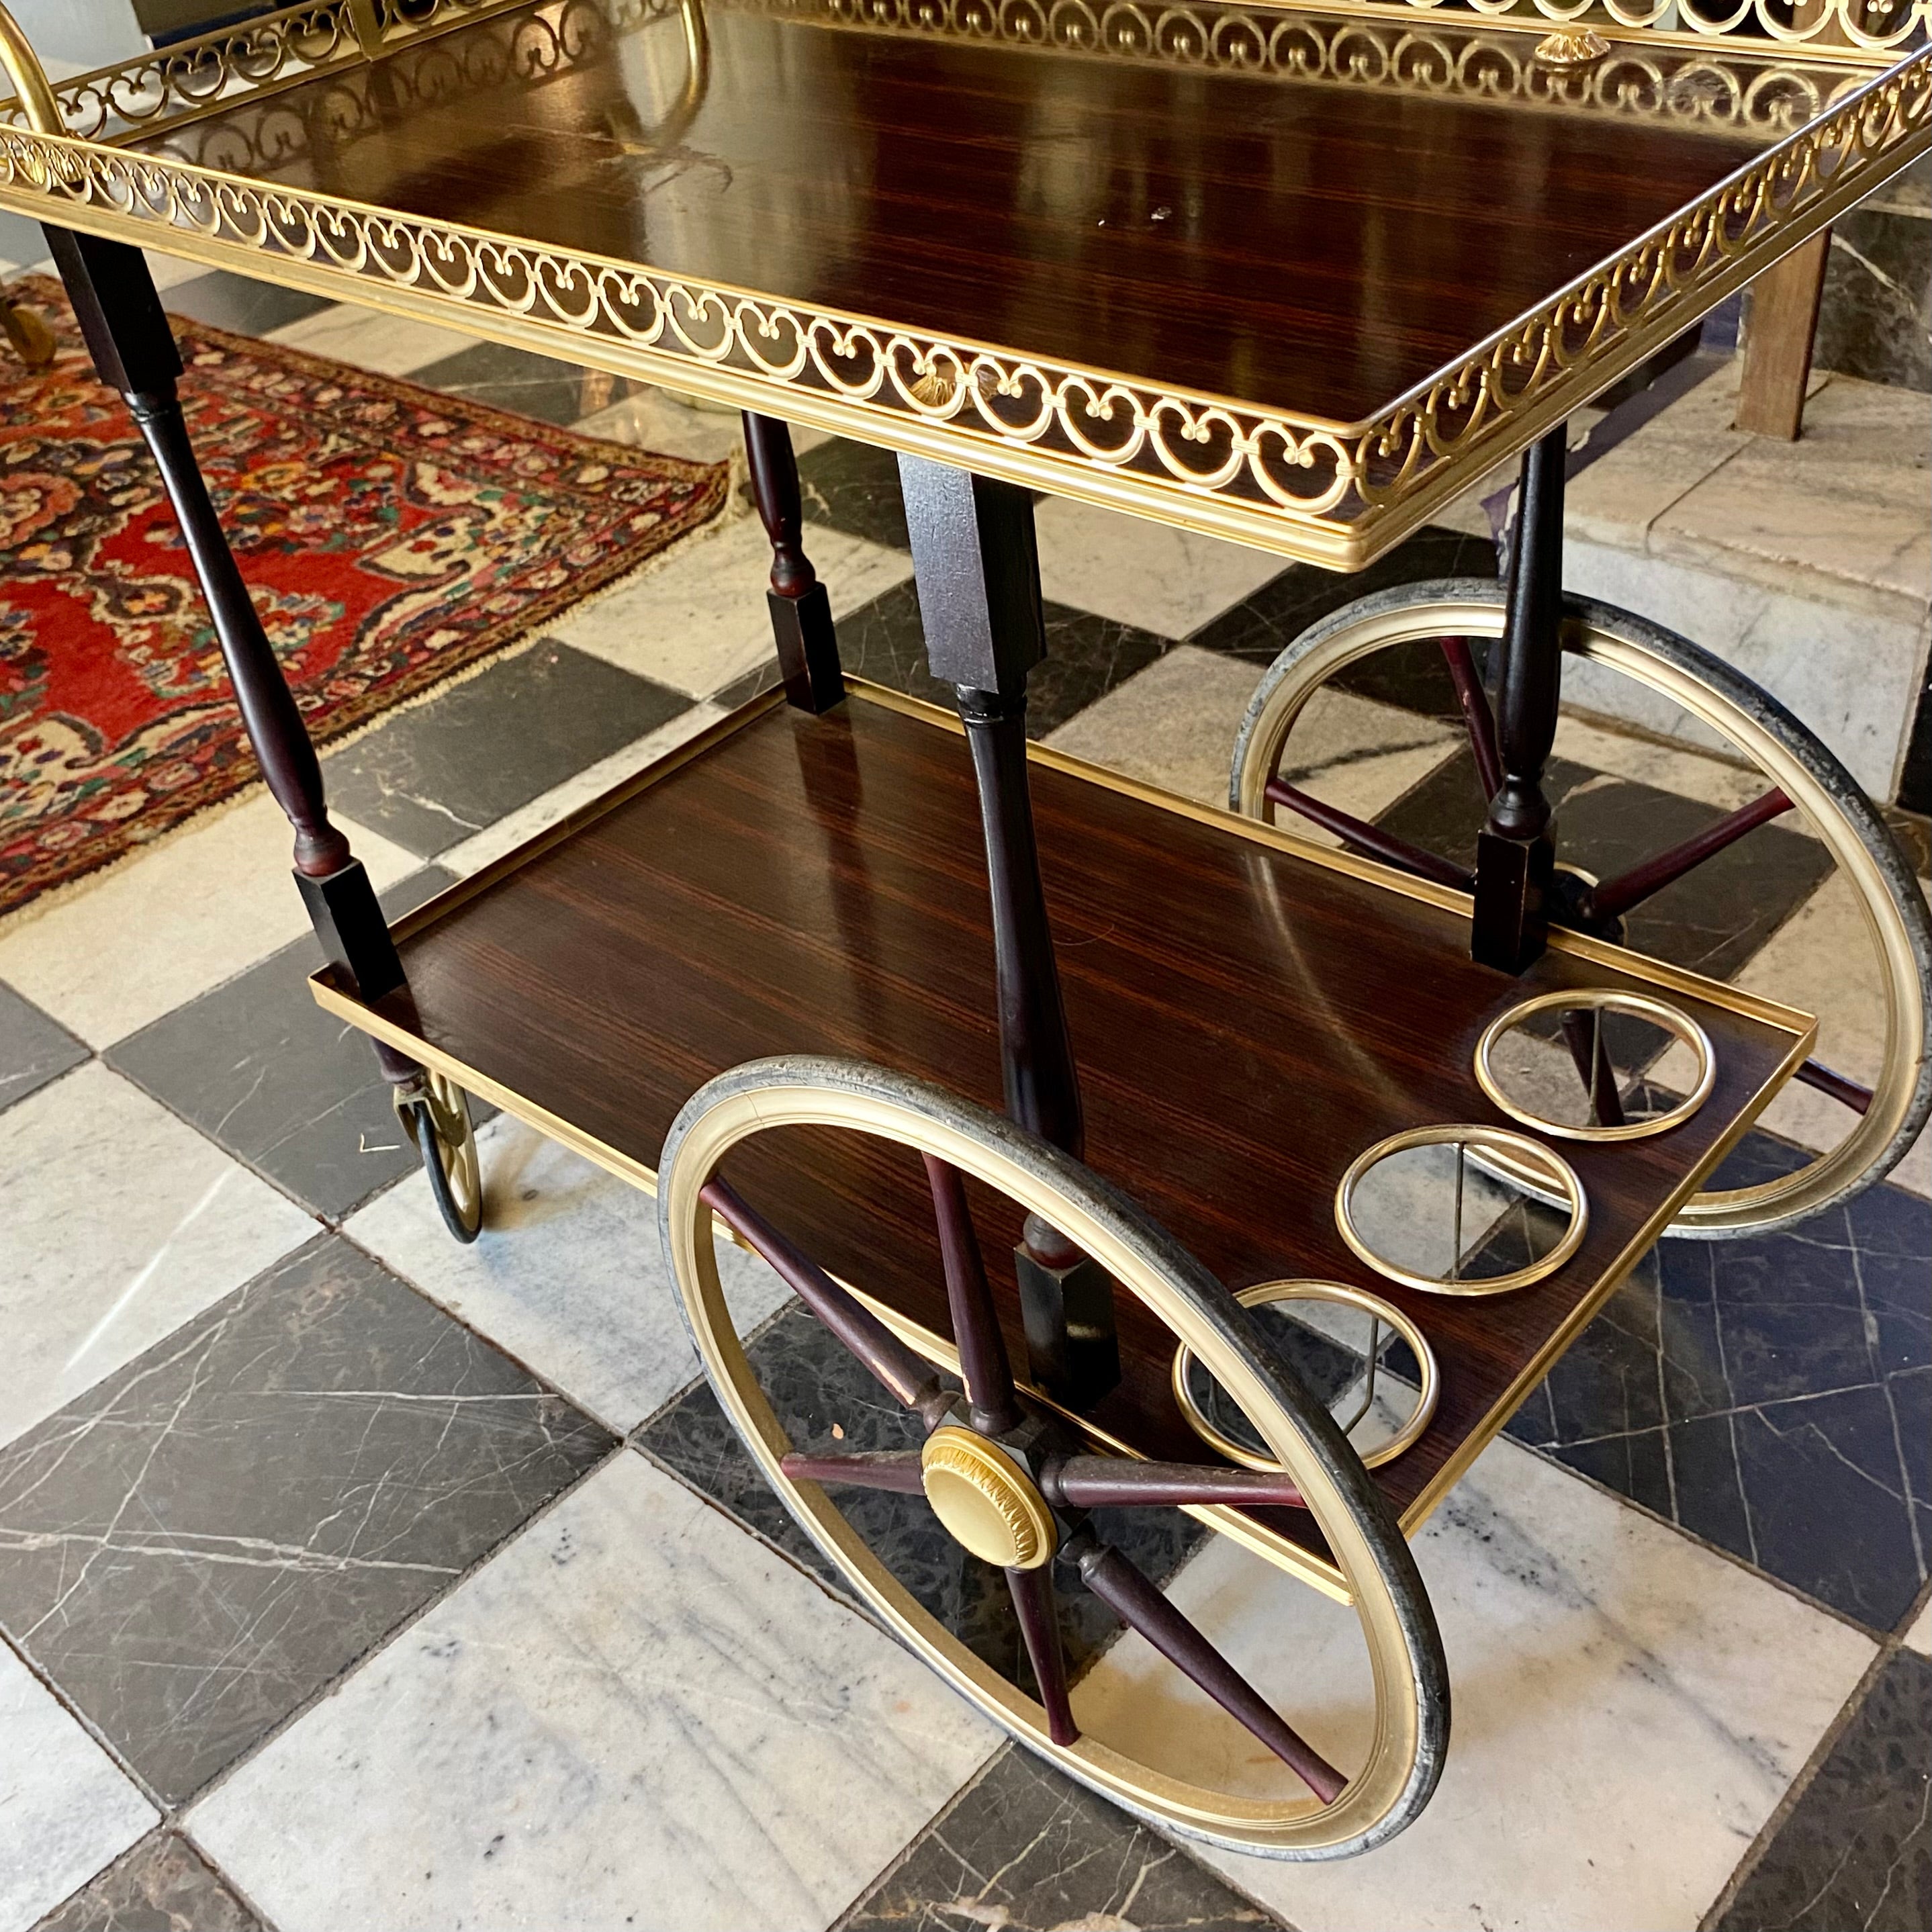 A Vintage Drinks Trolley with Brass Details